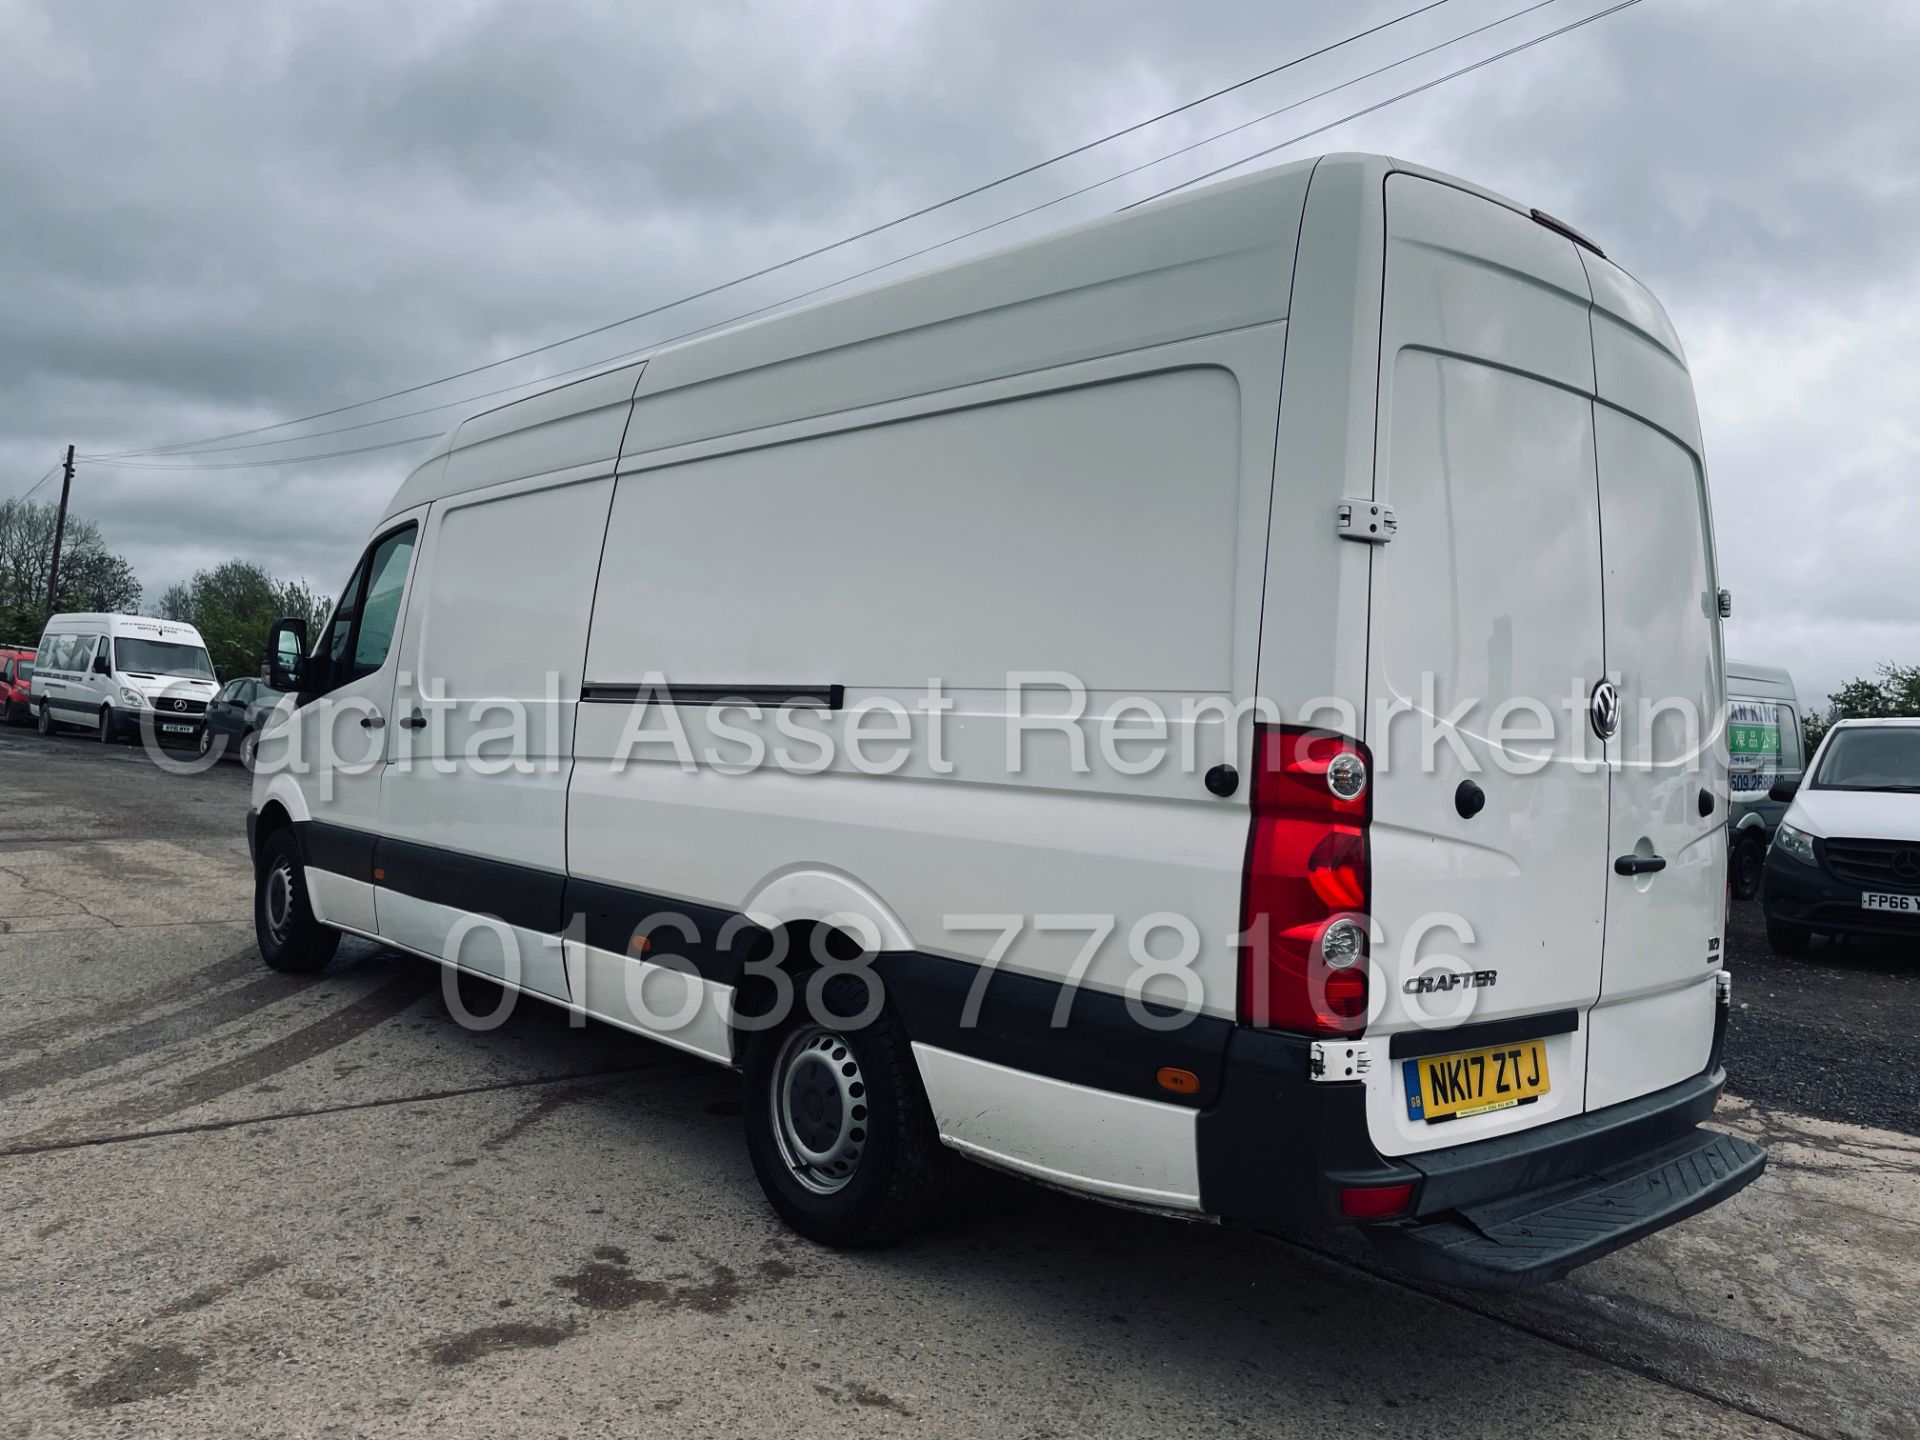 (On Sale) VOLKSWAGEN CRAFTER *LWB HI-ROOF* (2017 - EURO 6) '2.0 TDI BMT - 6 SPEED' *CRUISE CONTROL* - Image 10 of 39